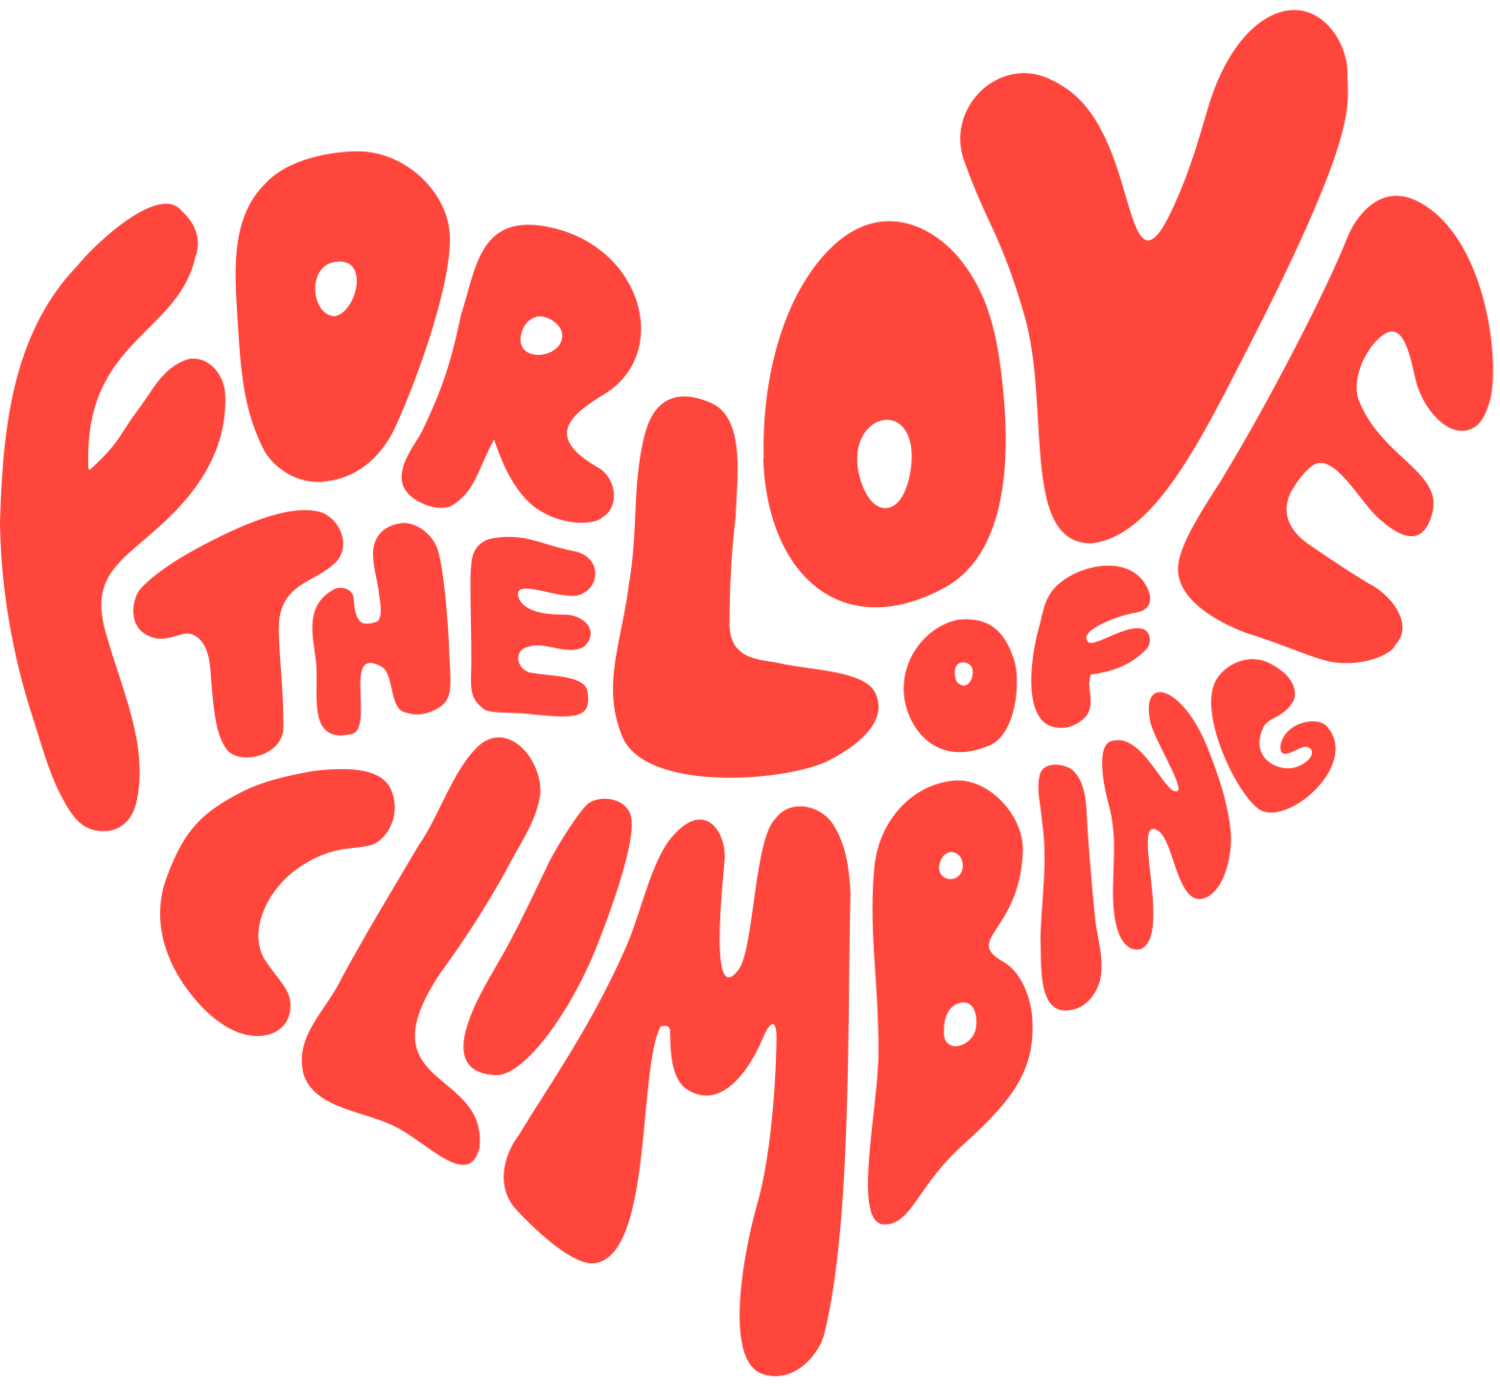 For the Love of Climbing